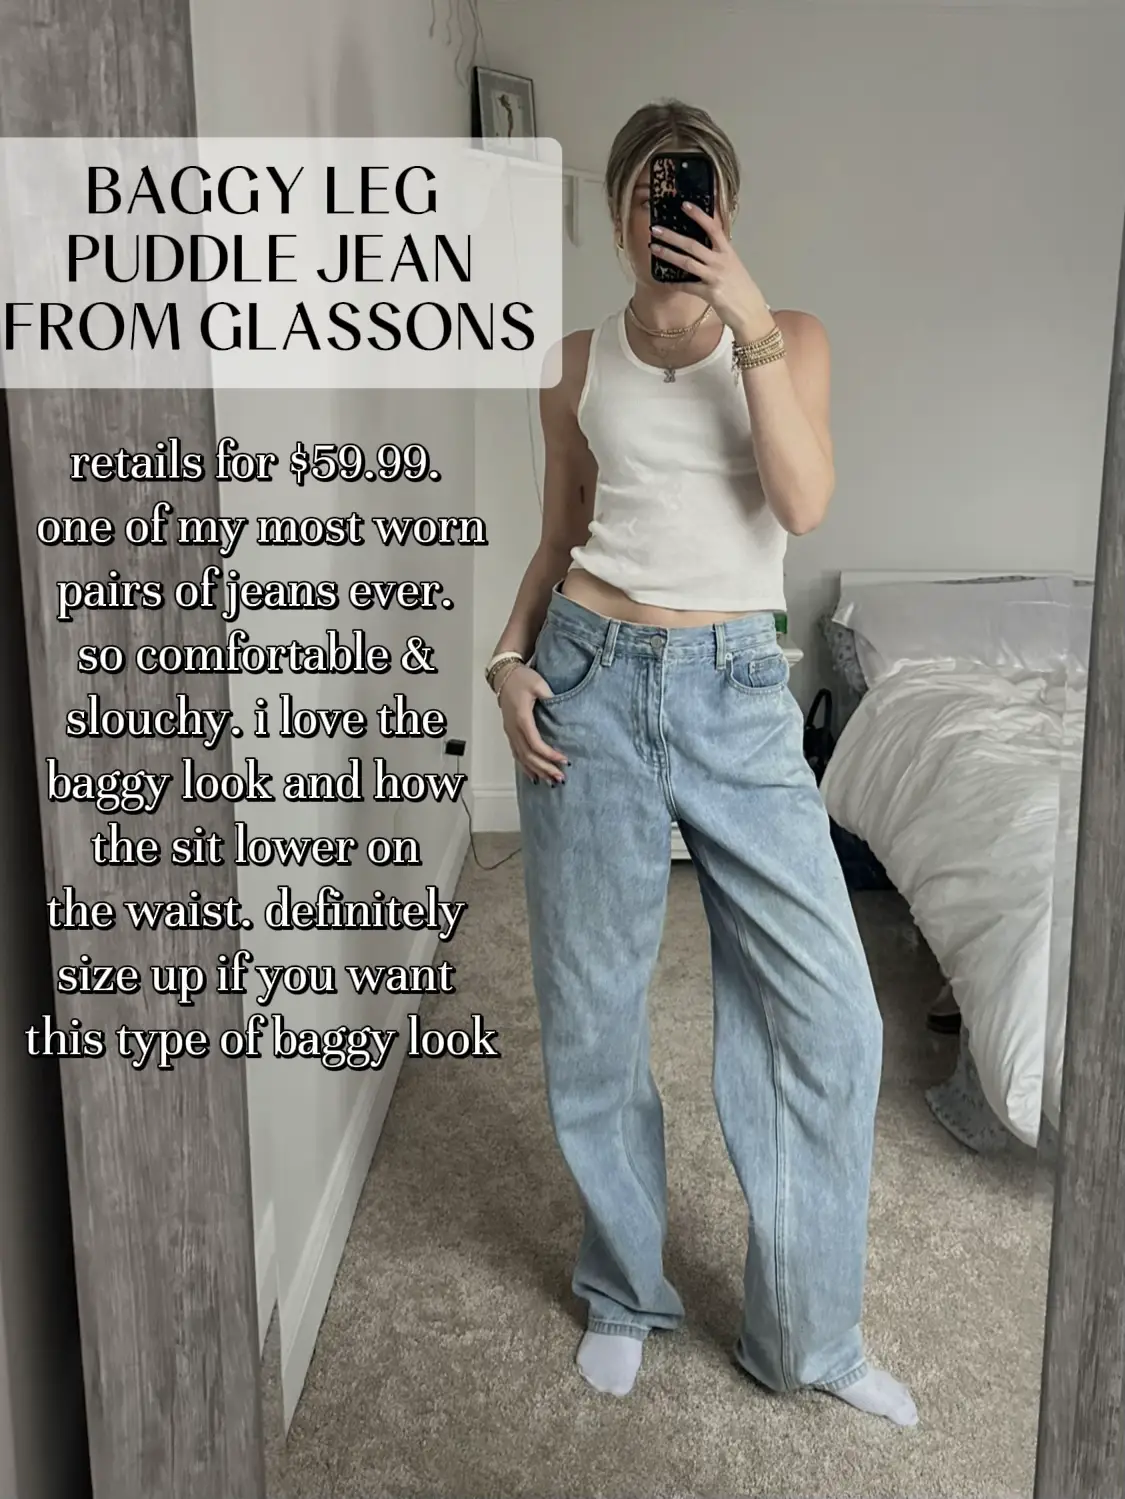 Hailey Bieber Wore a Tiny White Tank Top With the Baggiest Puddle Pants